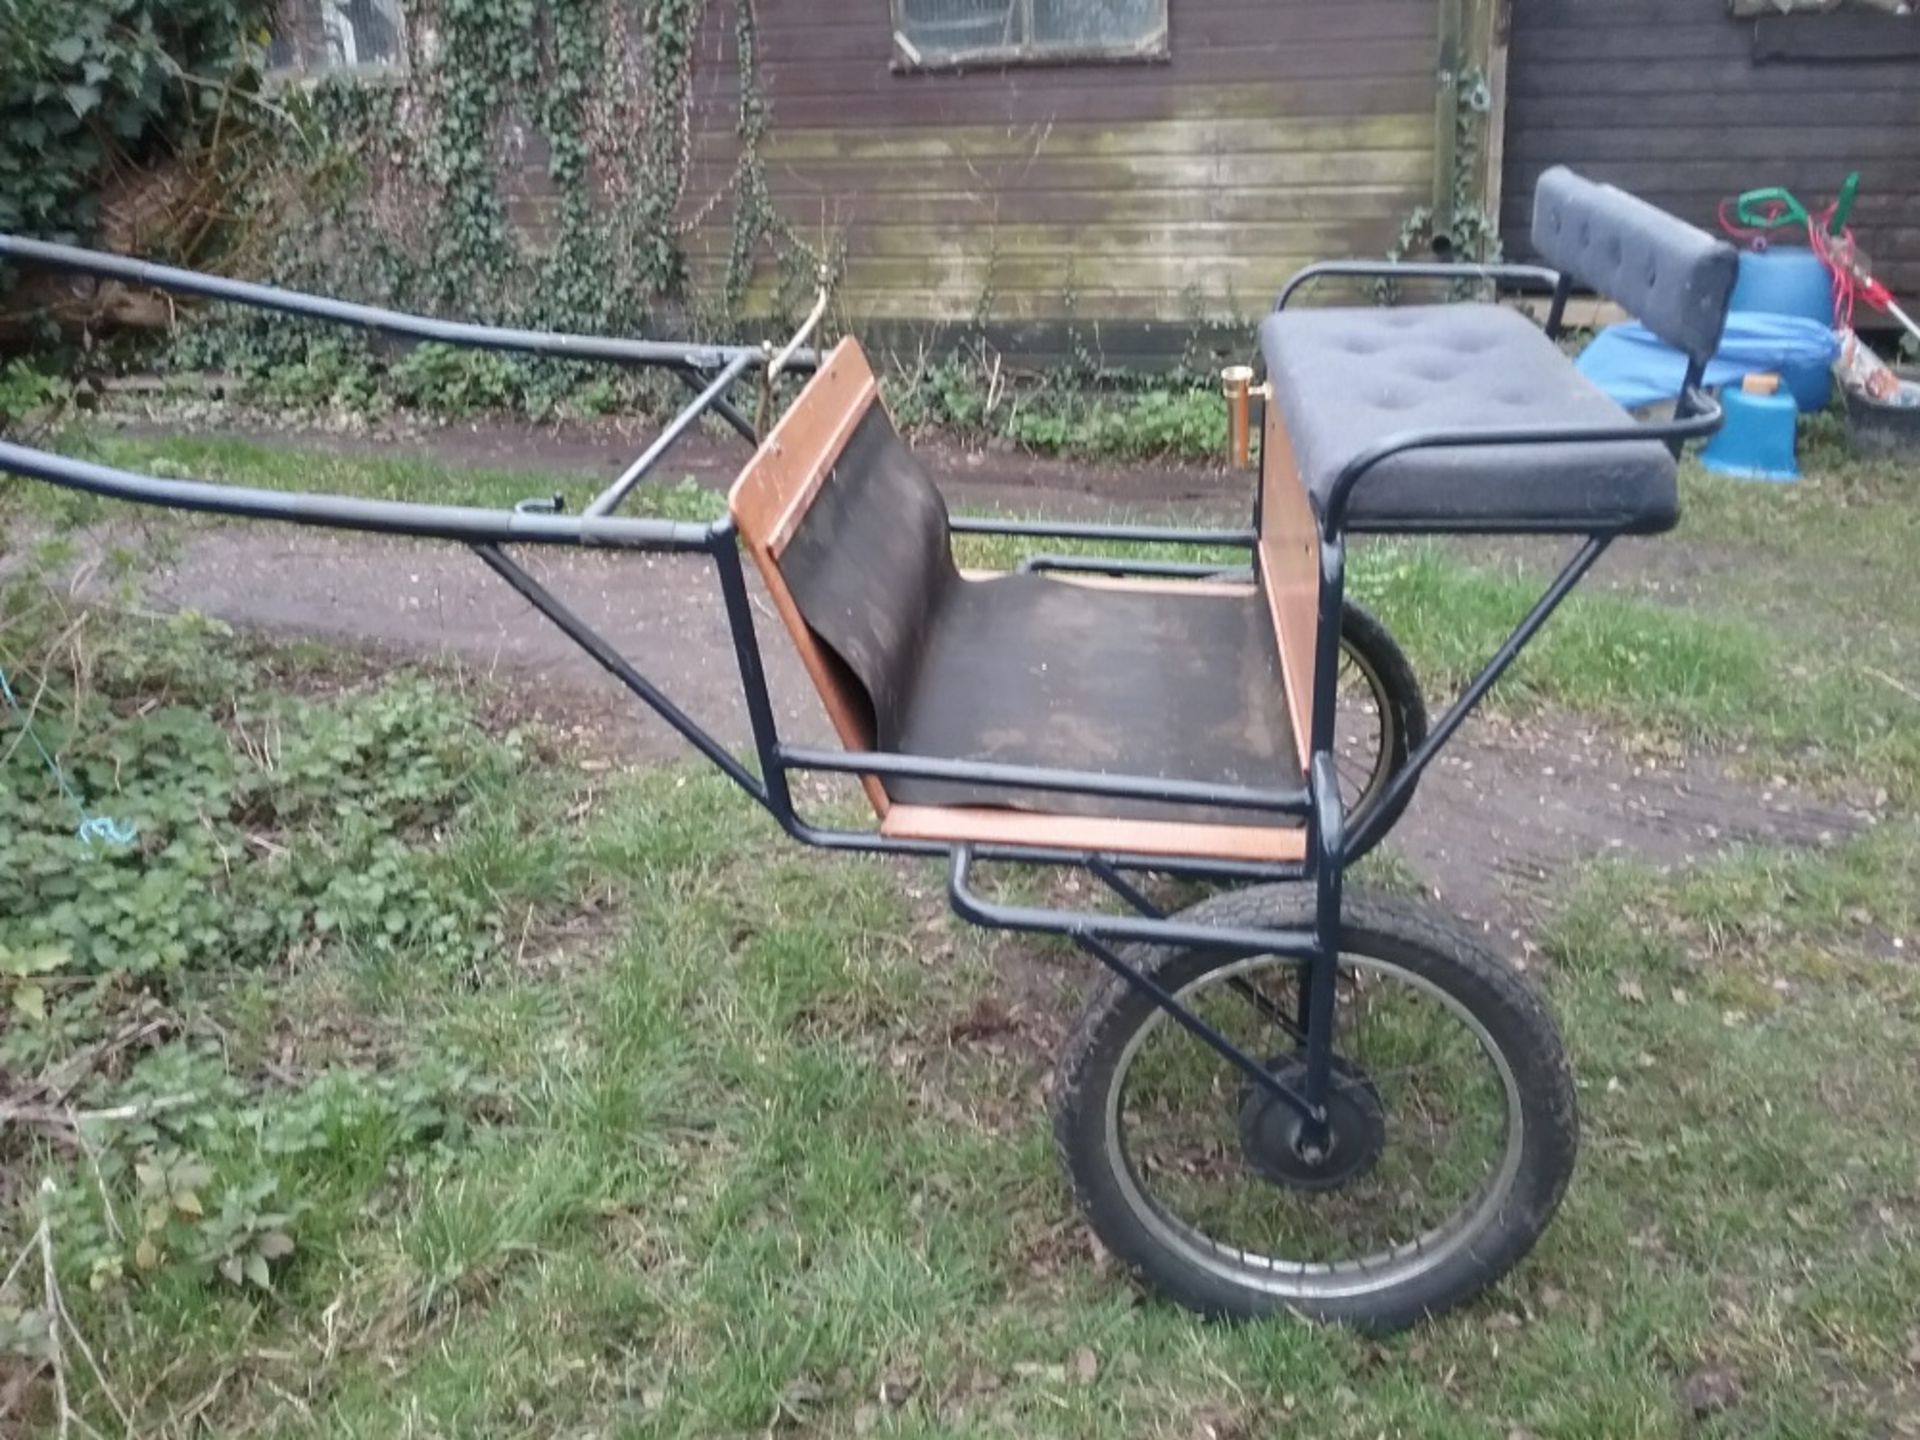 TWO-WHEEL EXERCISE CART to suit 13hh cob. - Image 3 of 8